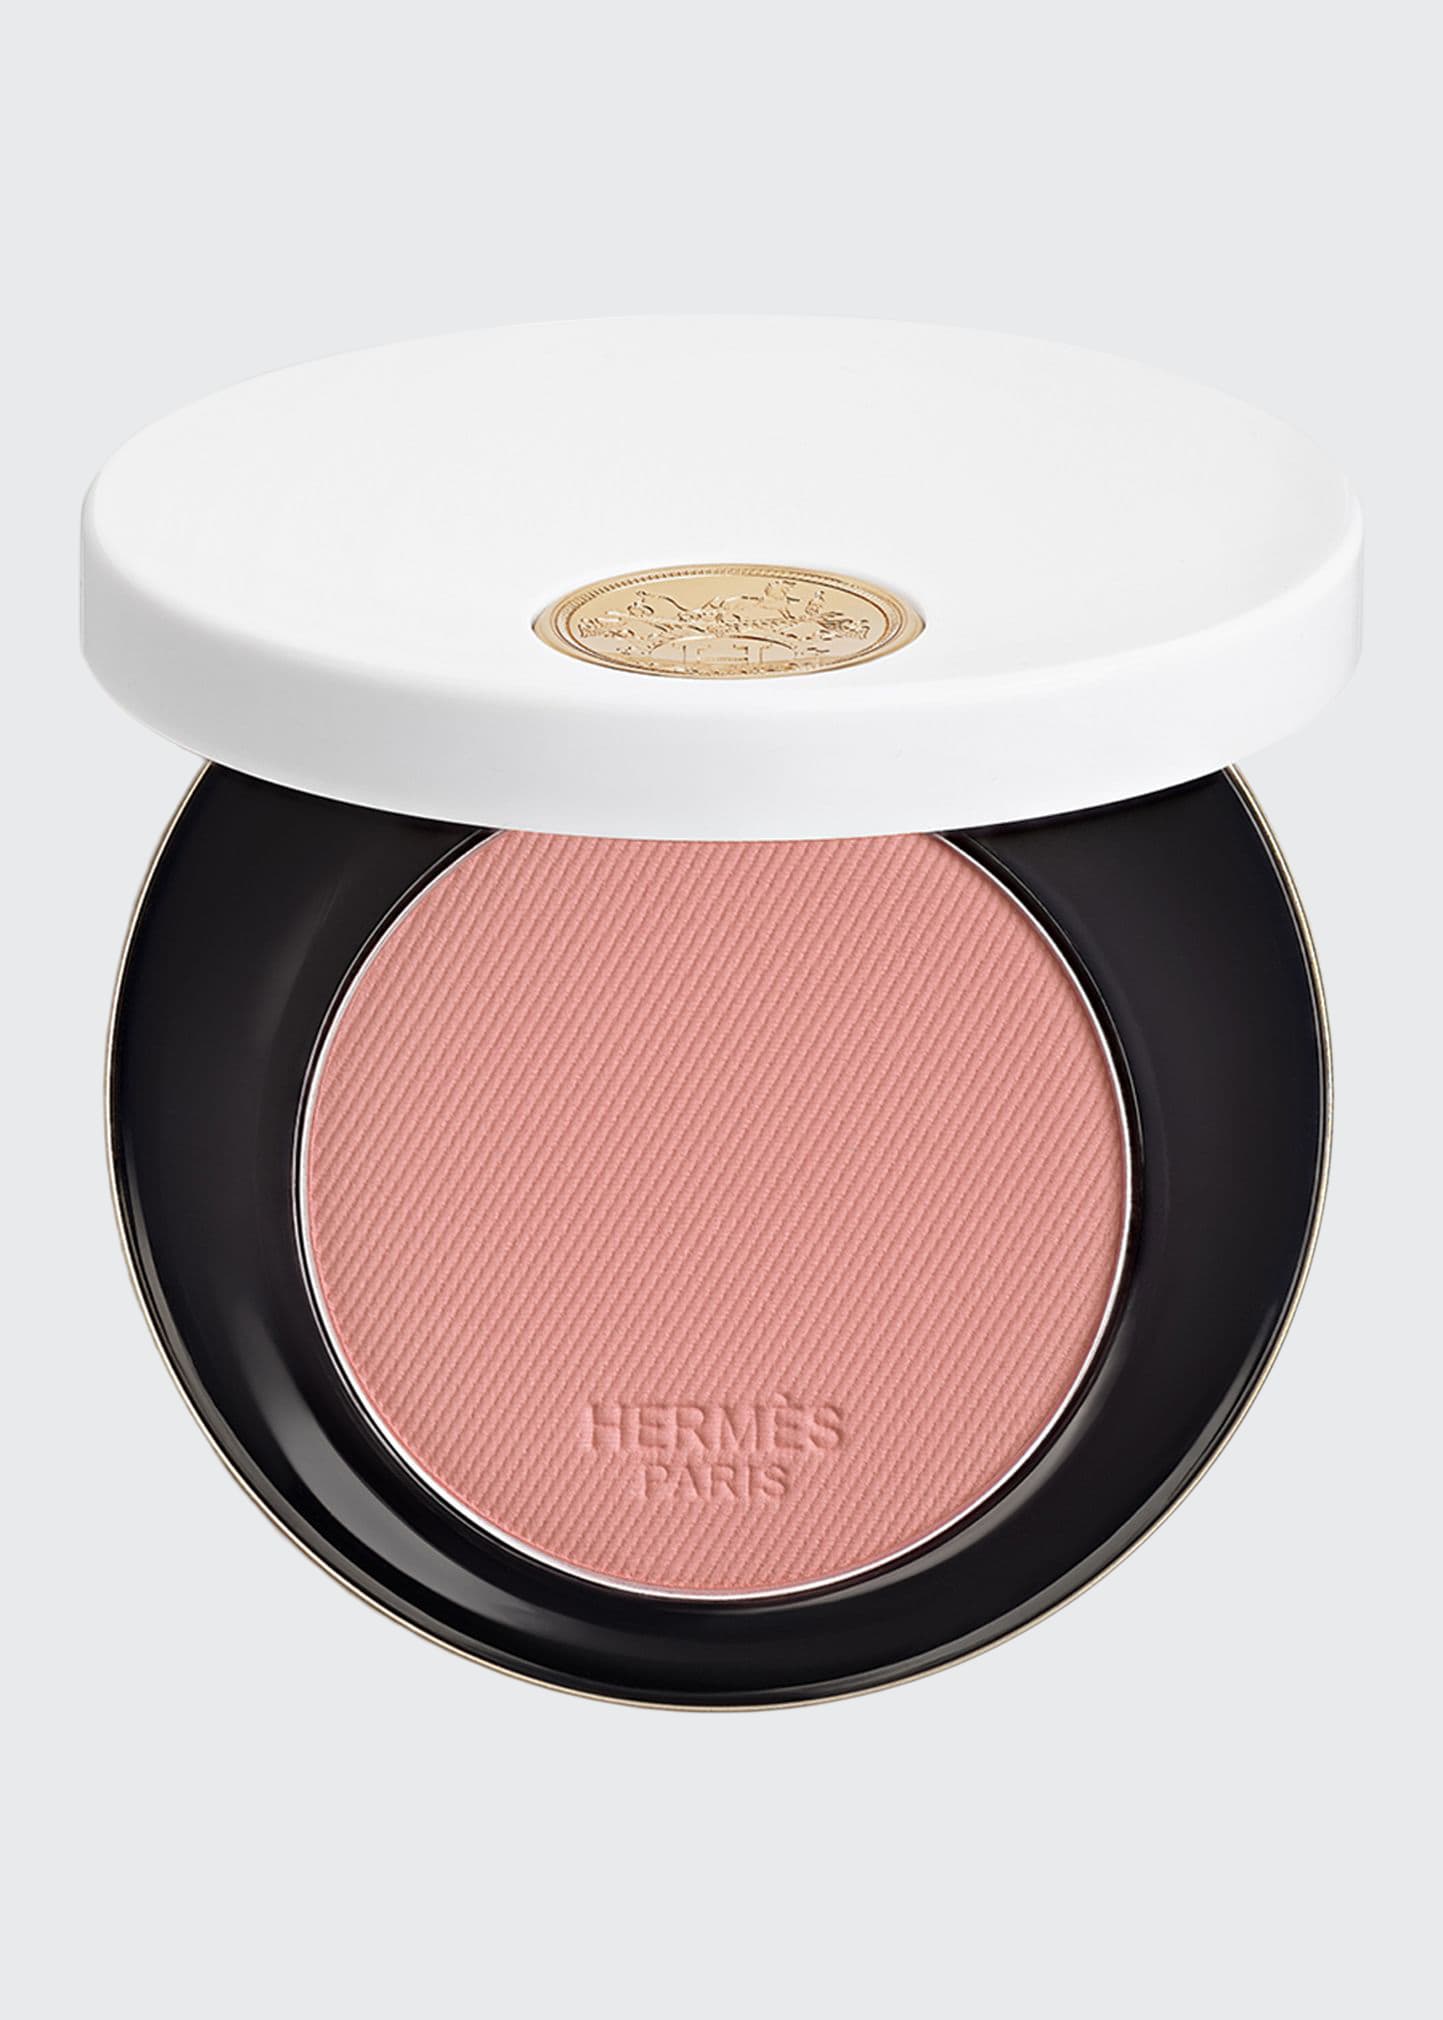 Hermes Rose  Silky Blush Powder In 45 Rose Ombre